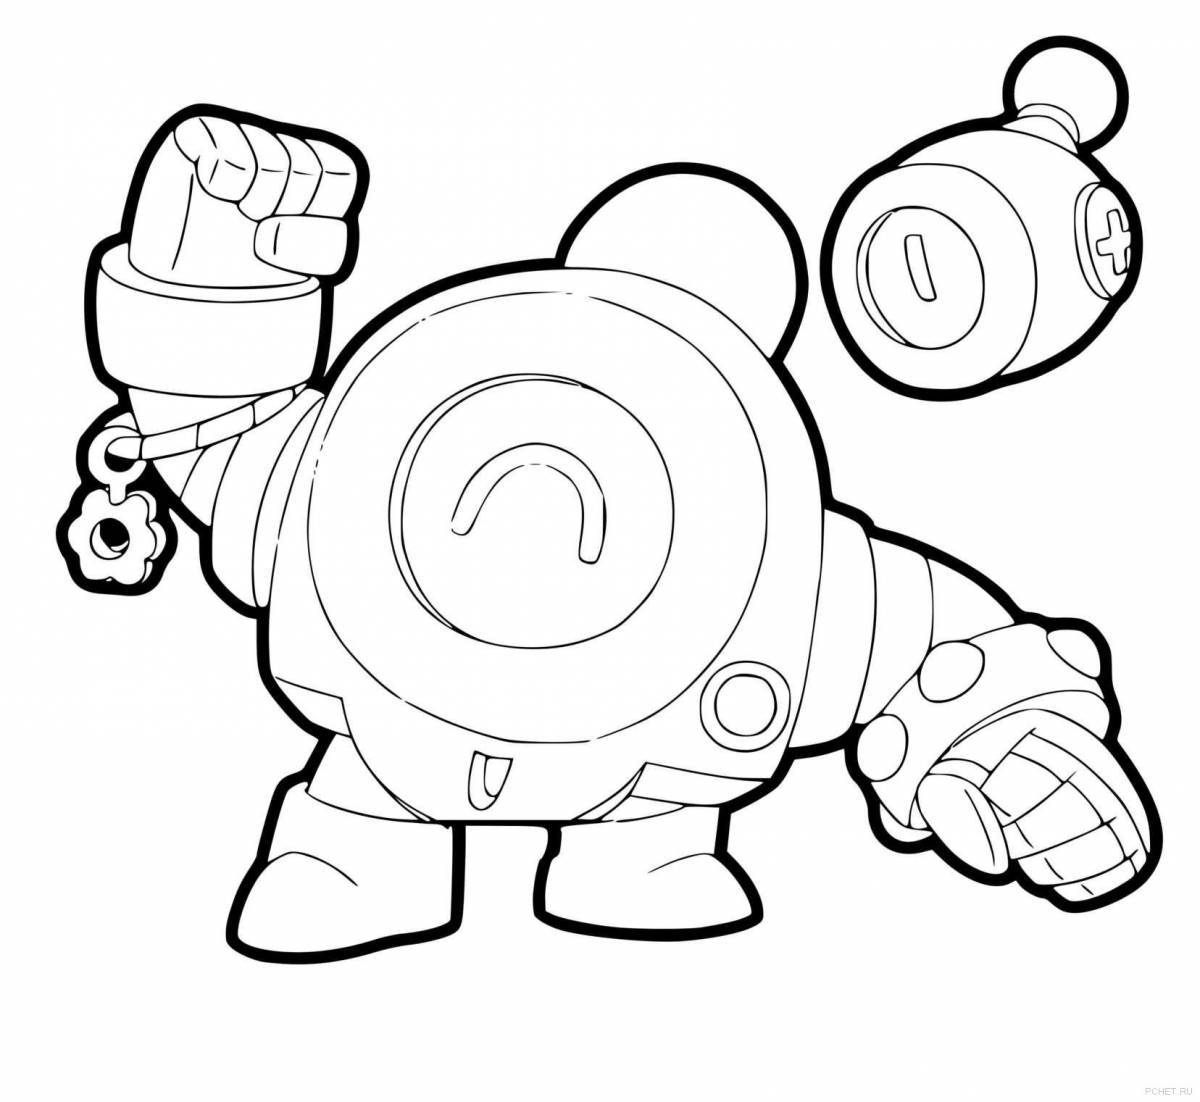 Fabulous bravo stars buster coloring page